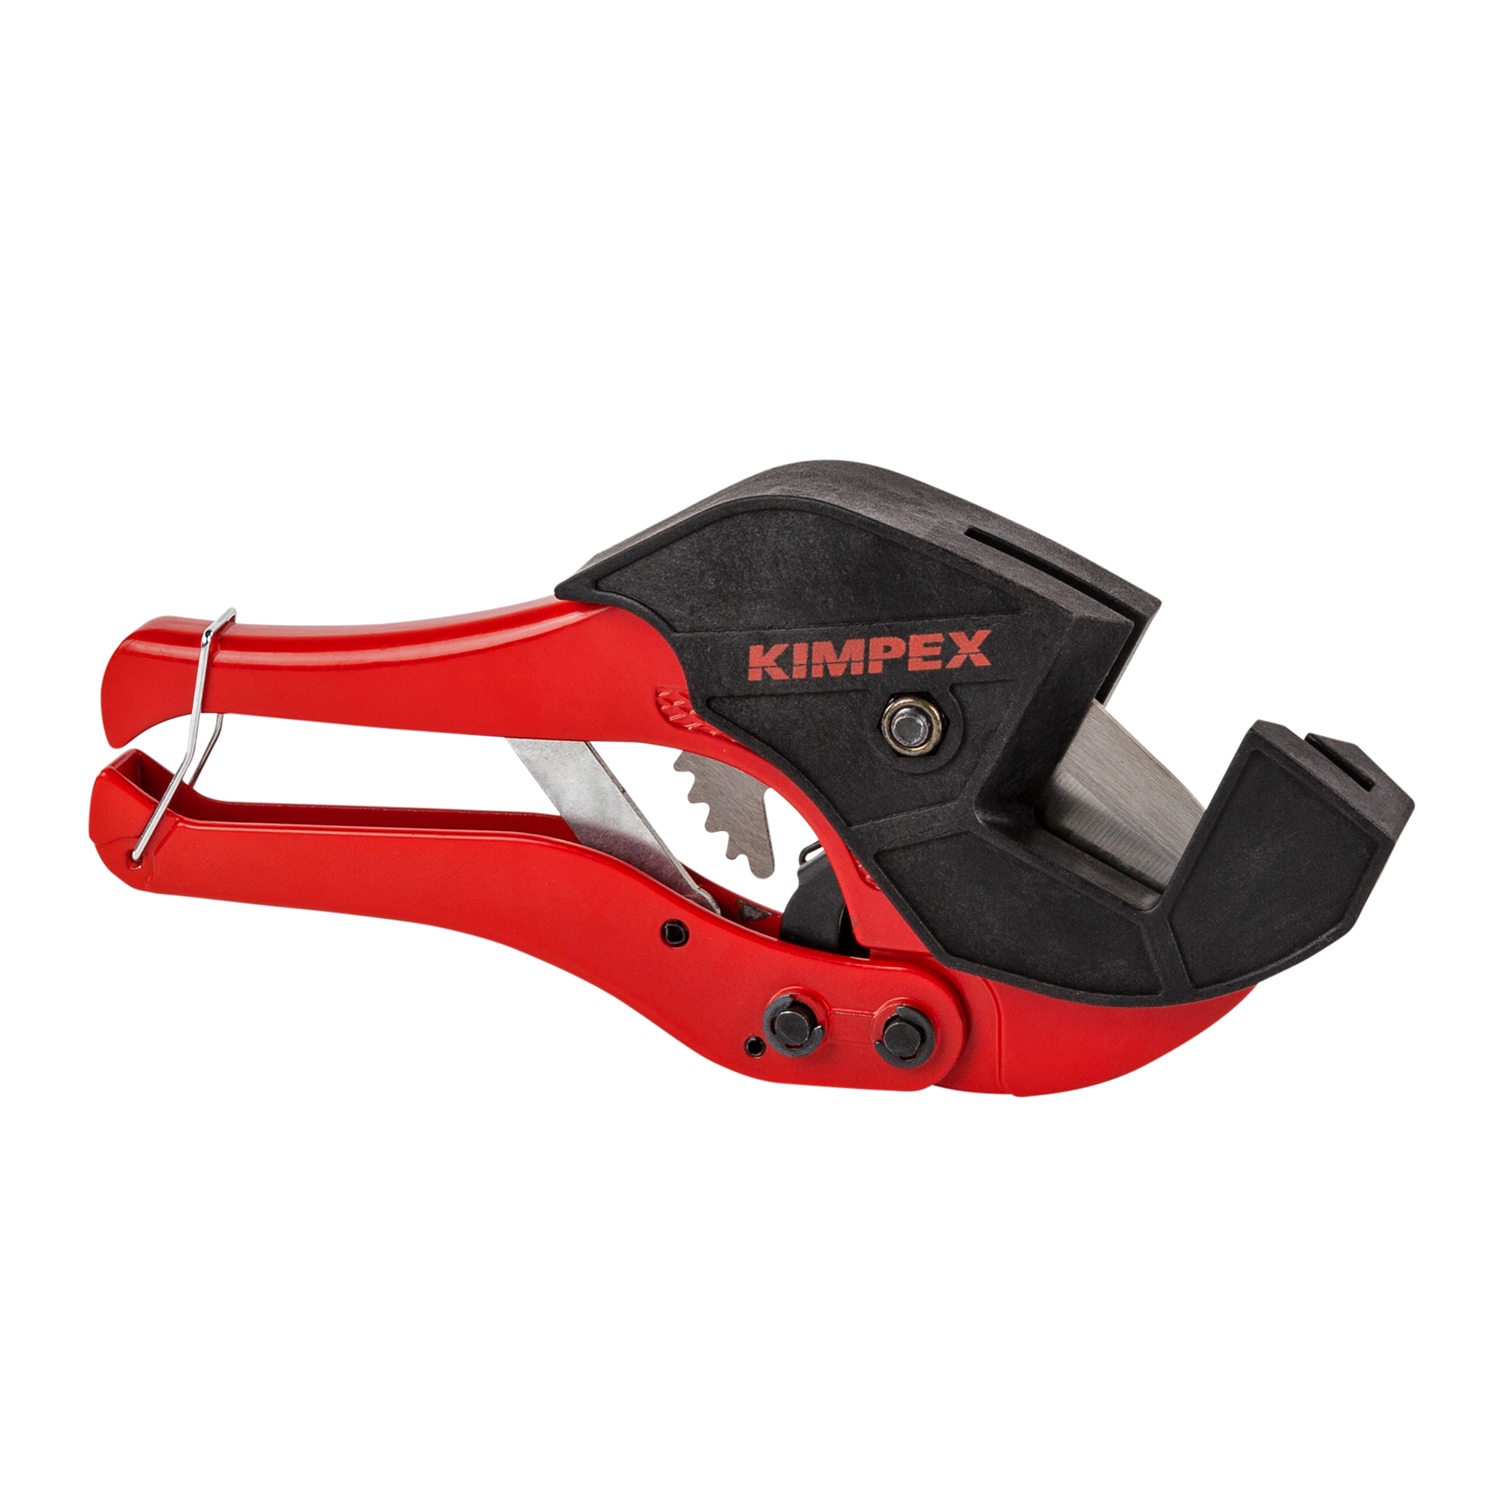 slide cutter pliers, slide cutter pliers Suppliers and Manufacturers at